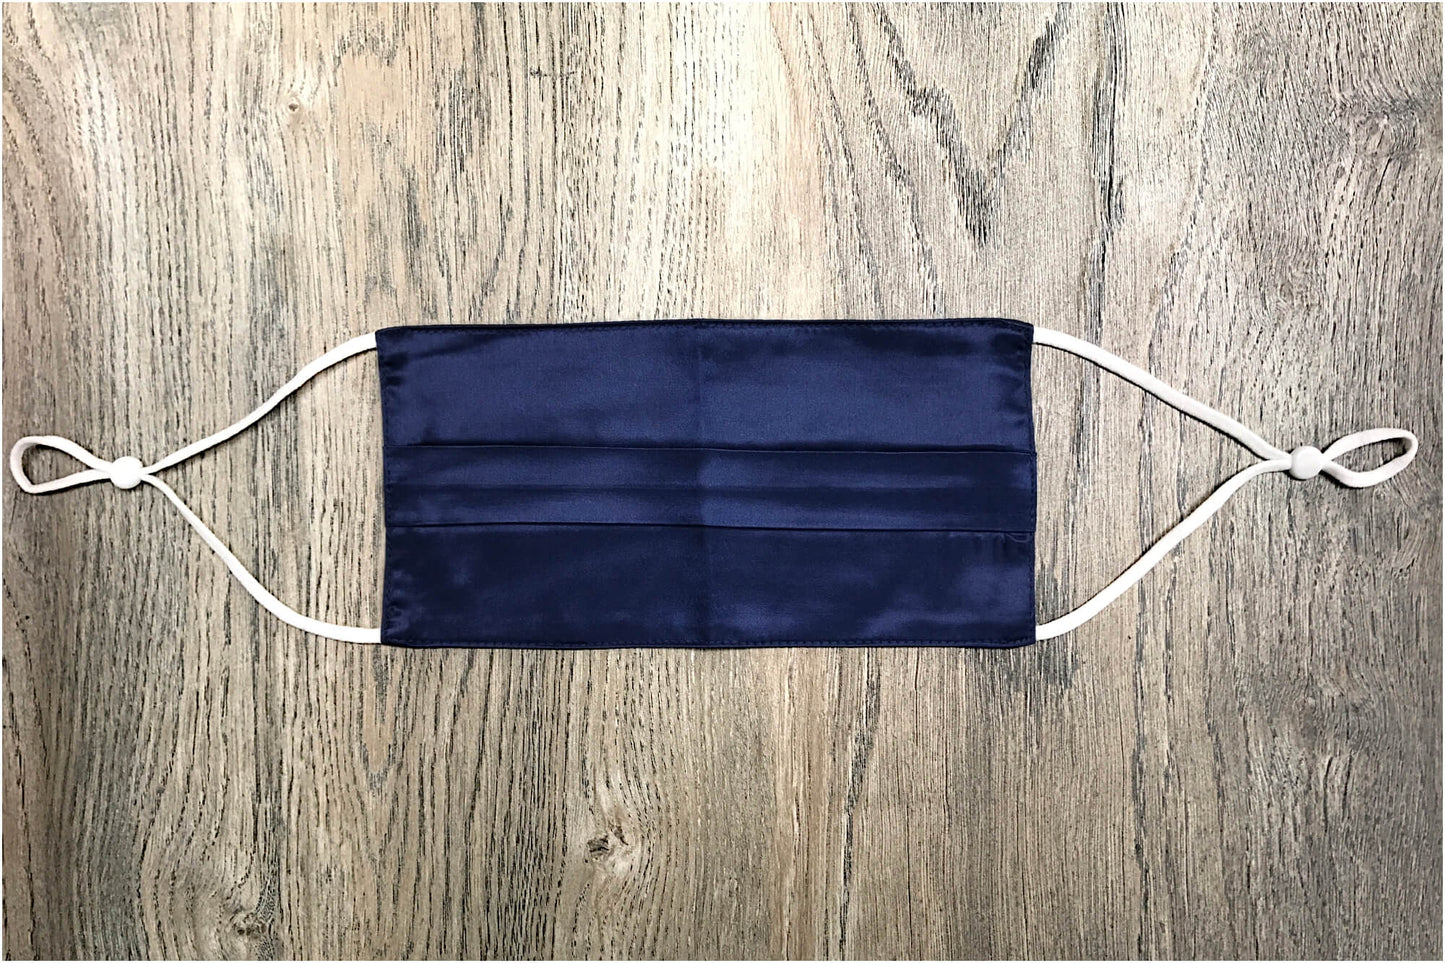 navy blue silk face mask pleated navy silk face covering pure silk face mask